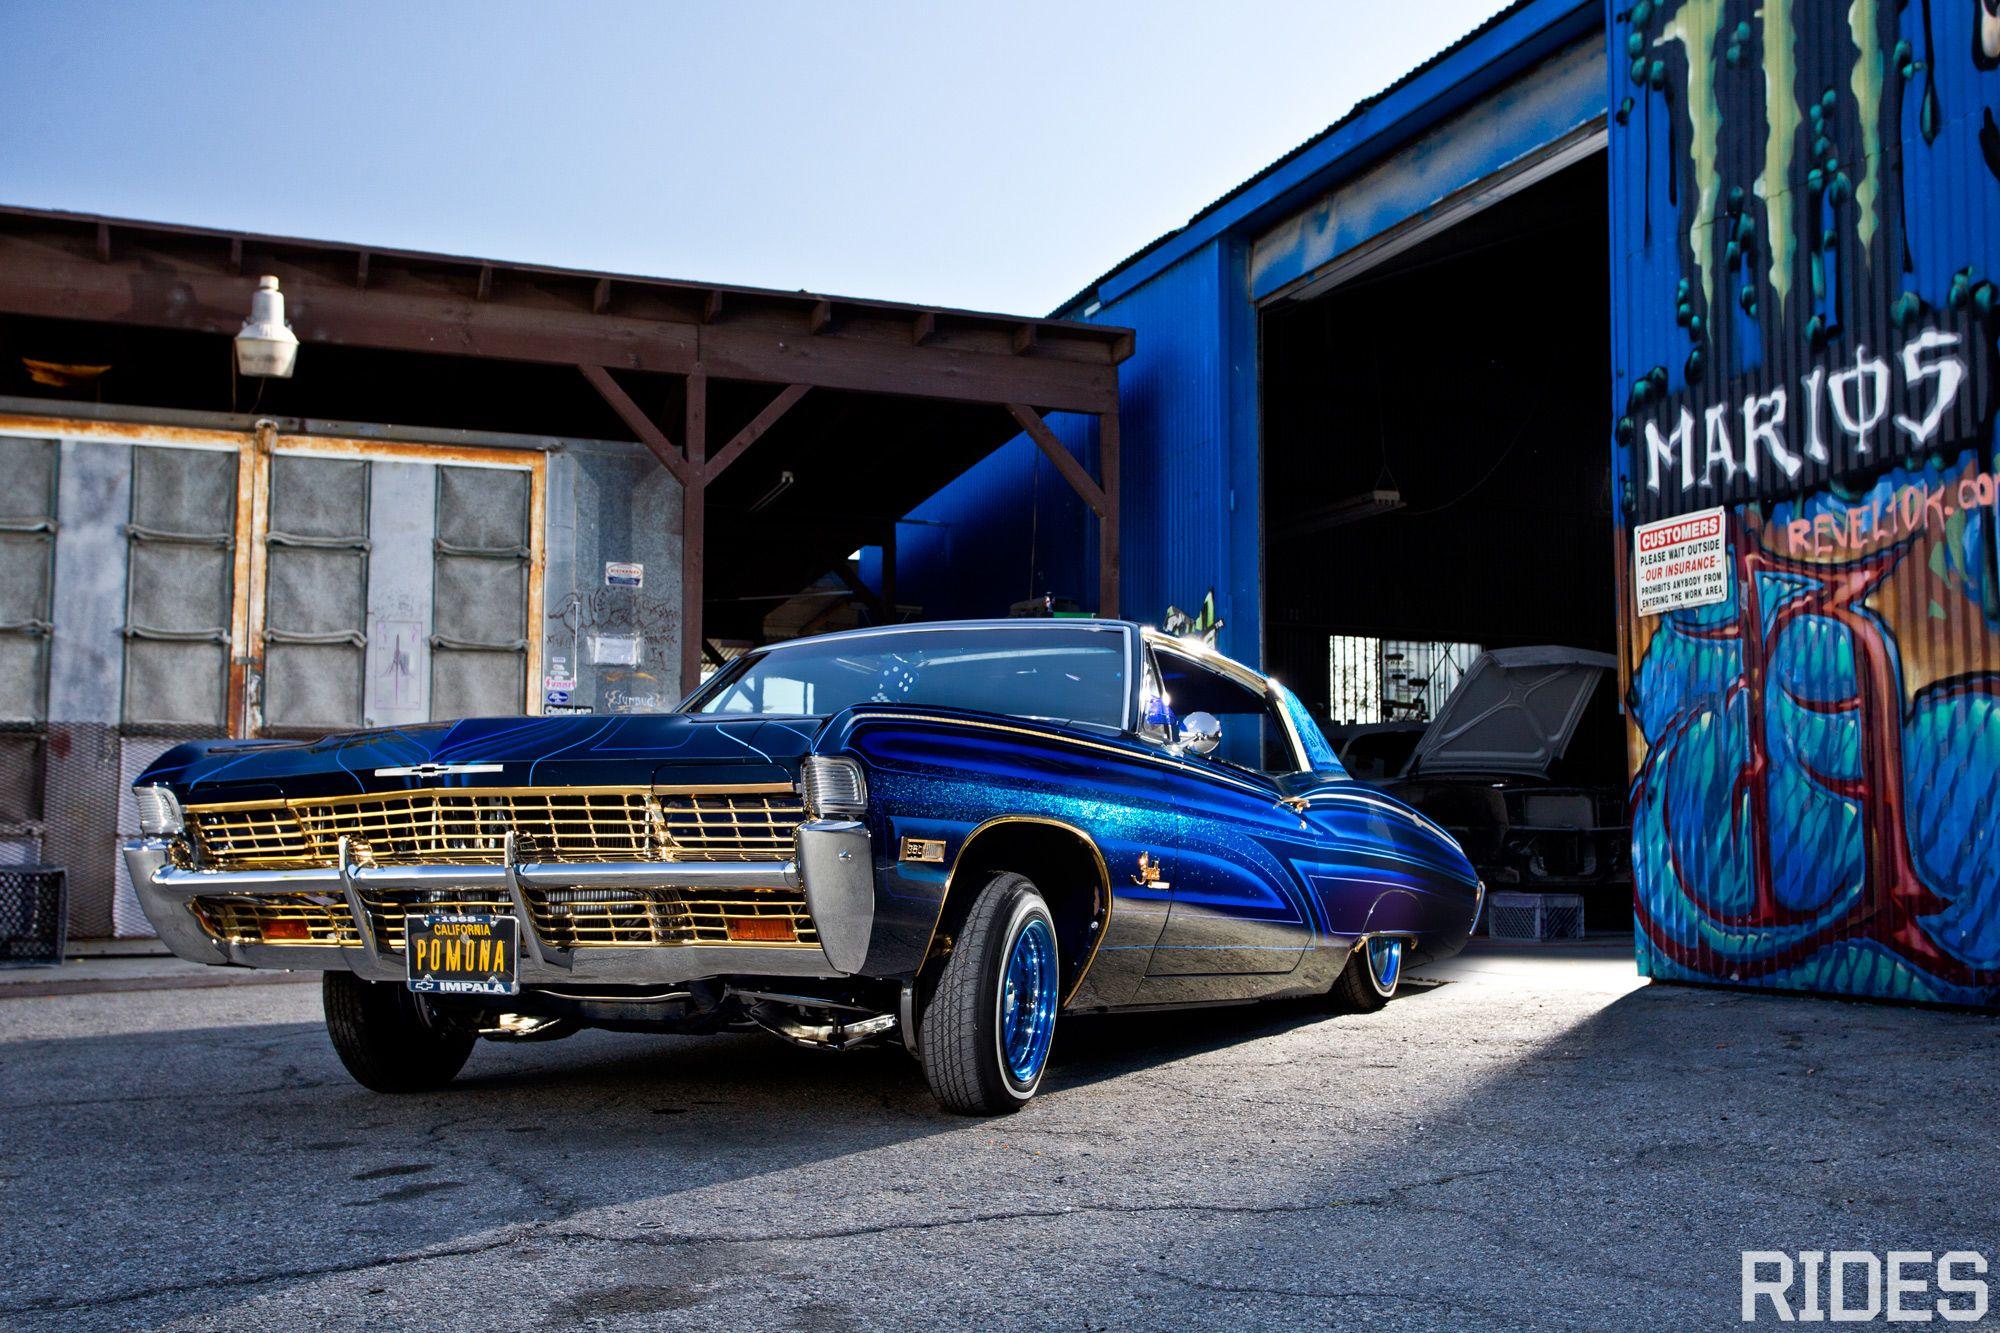 Lowrider Wallpaper, Image, Wallpaper of Lowrider in HQFX Quality